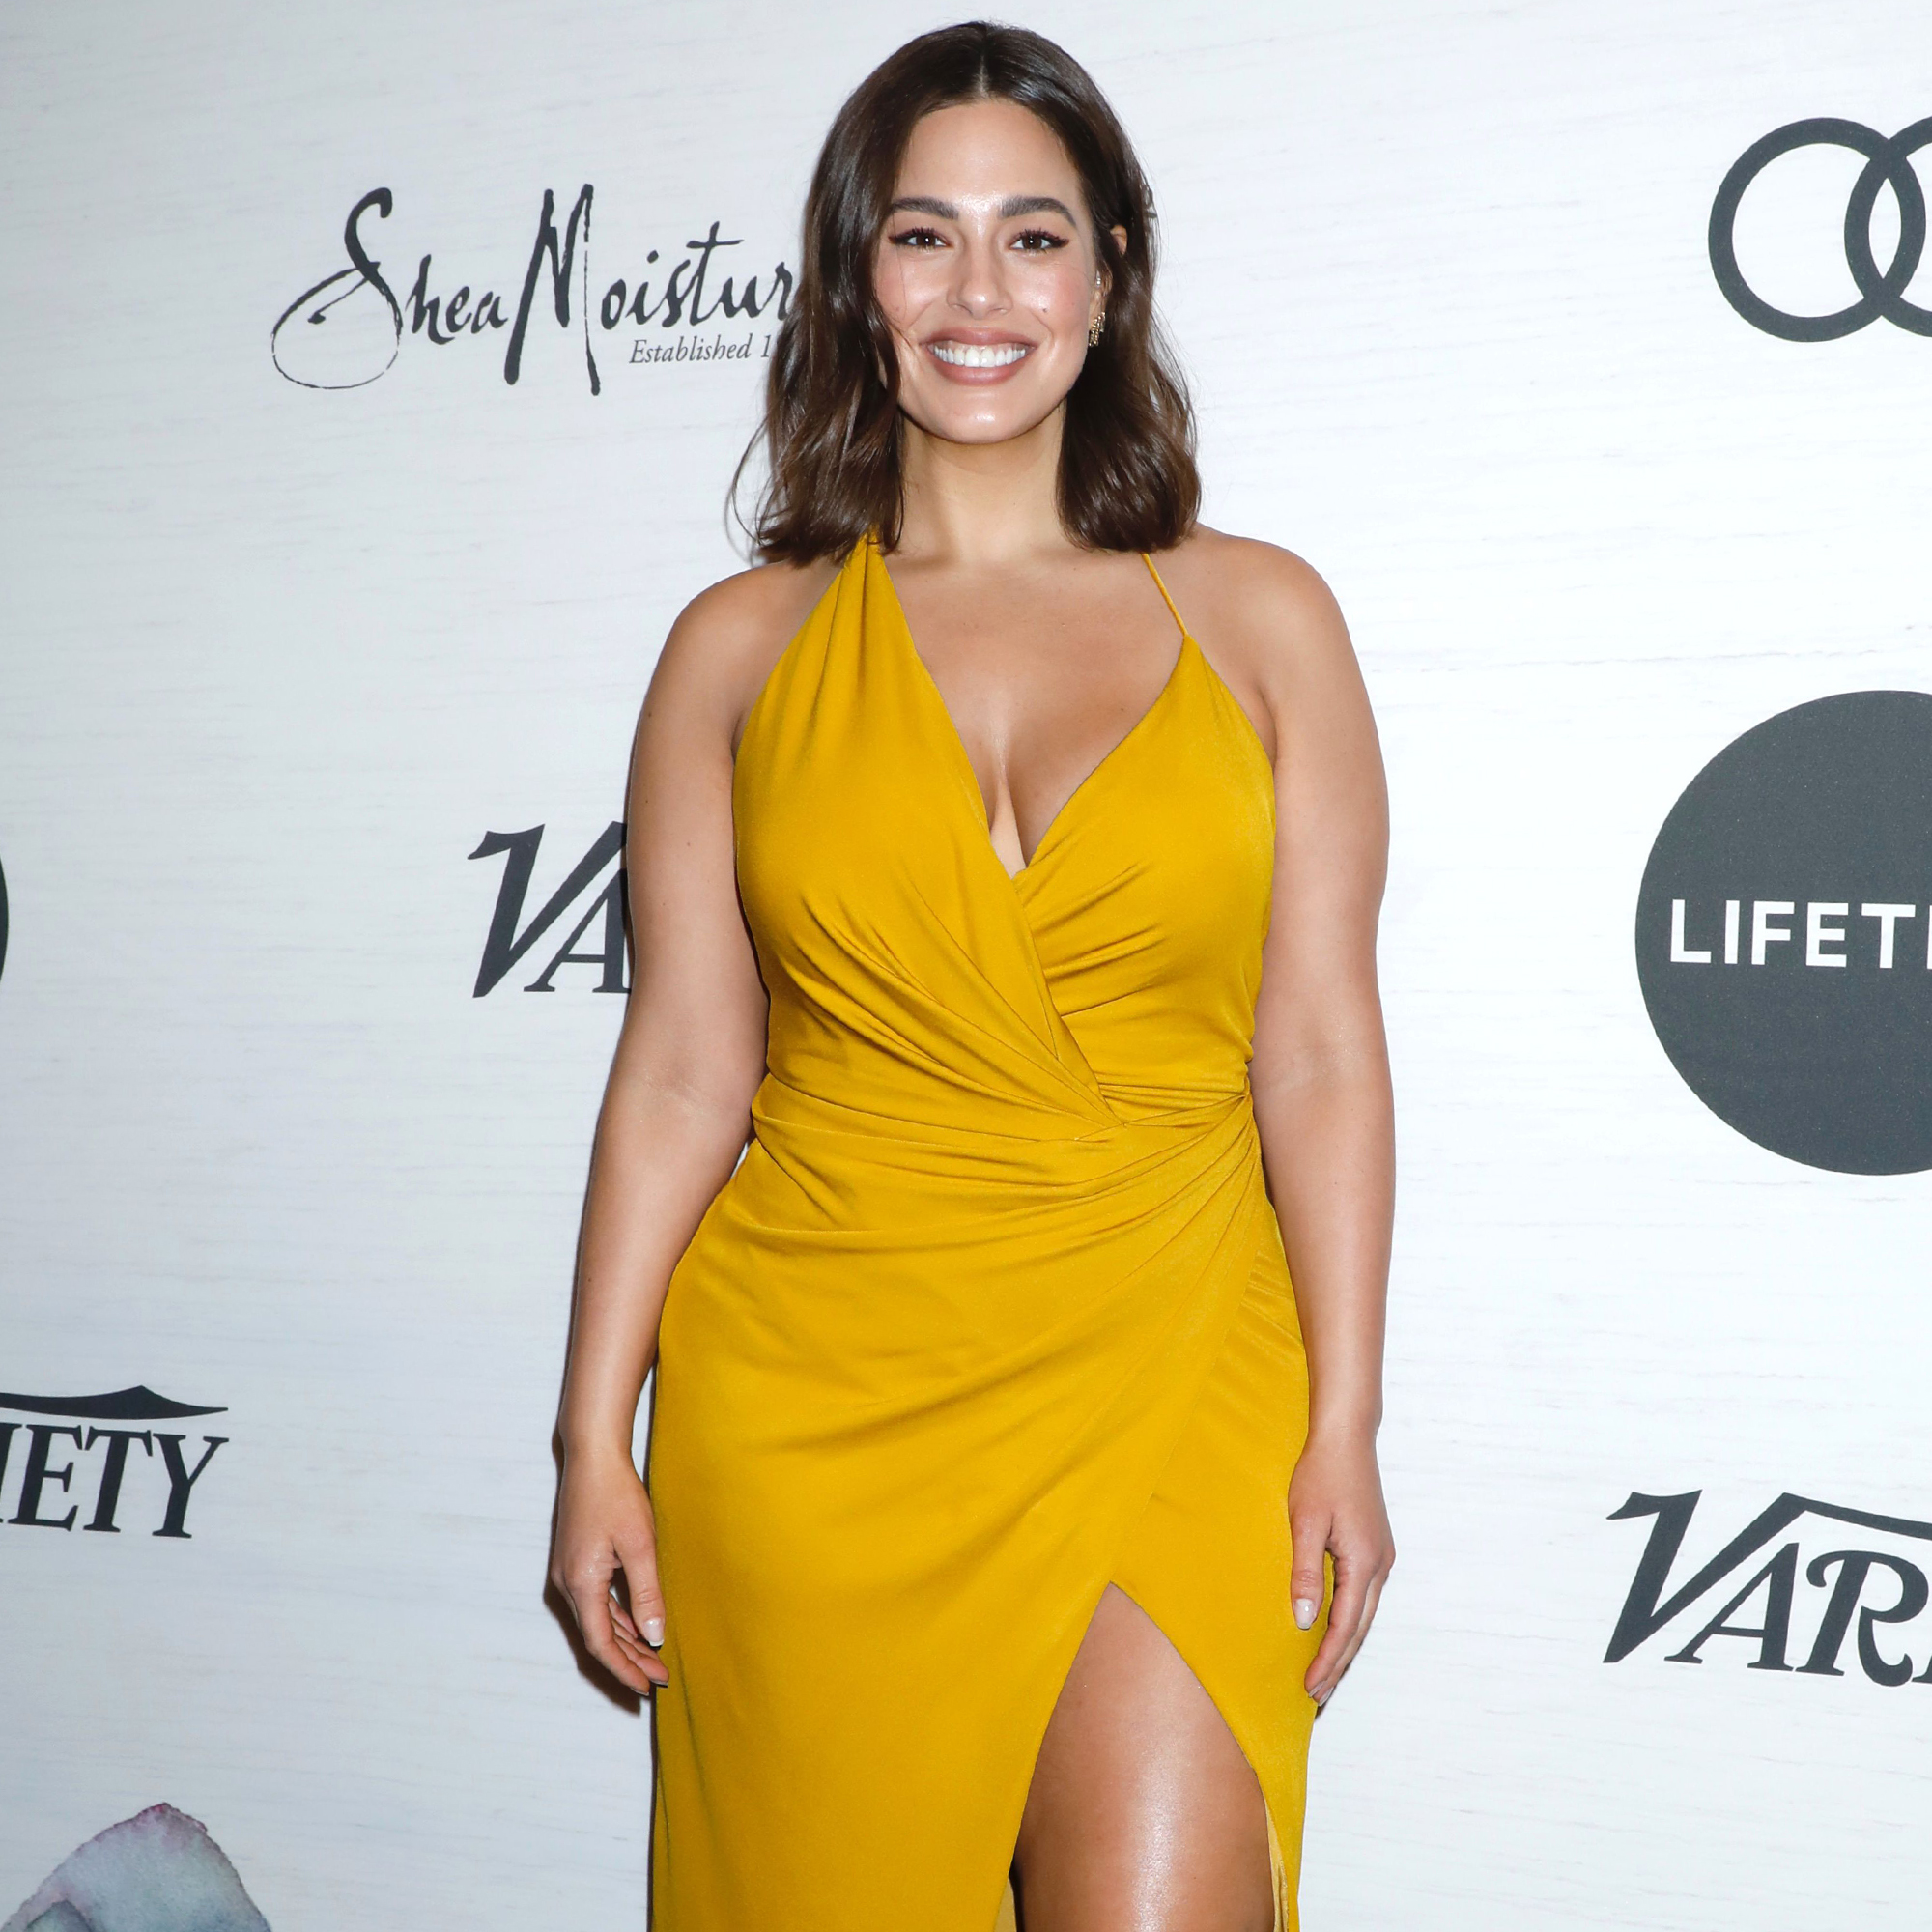 Top Nudist Mom - Pregnant Ashley Graham Praised for Nude Photo With Stretch Marks